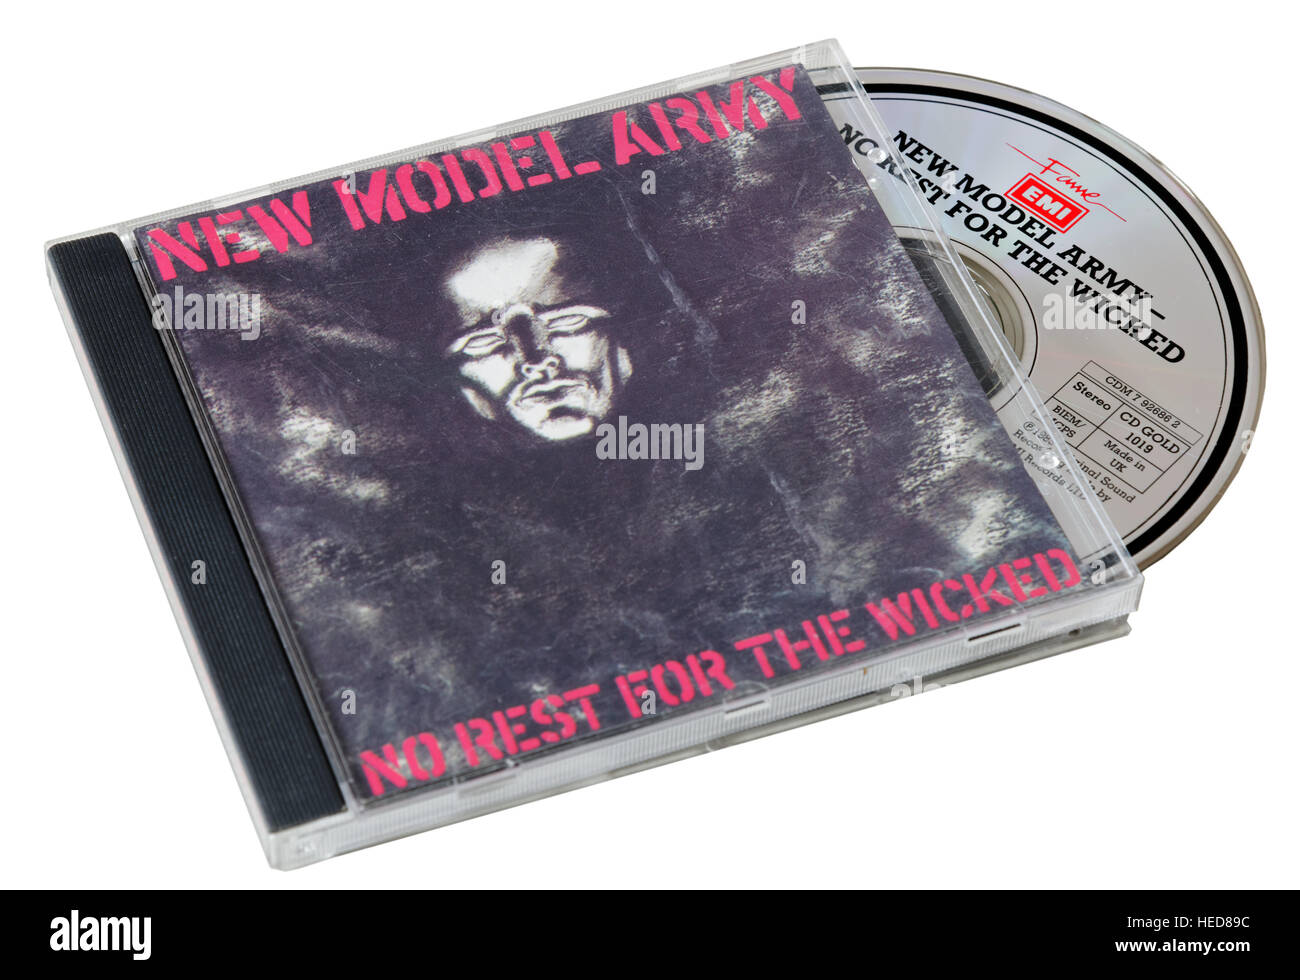 New Model Army No Rest For The Wicked CD Stock Photo